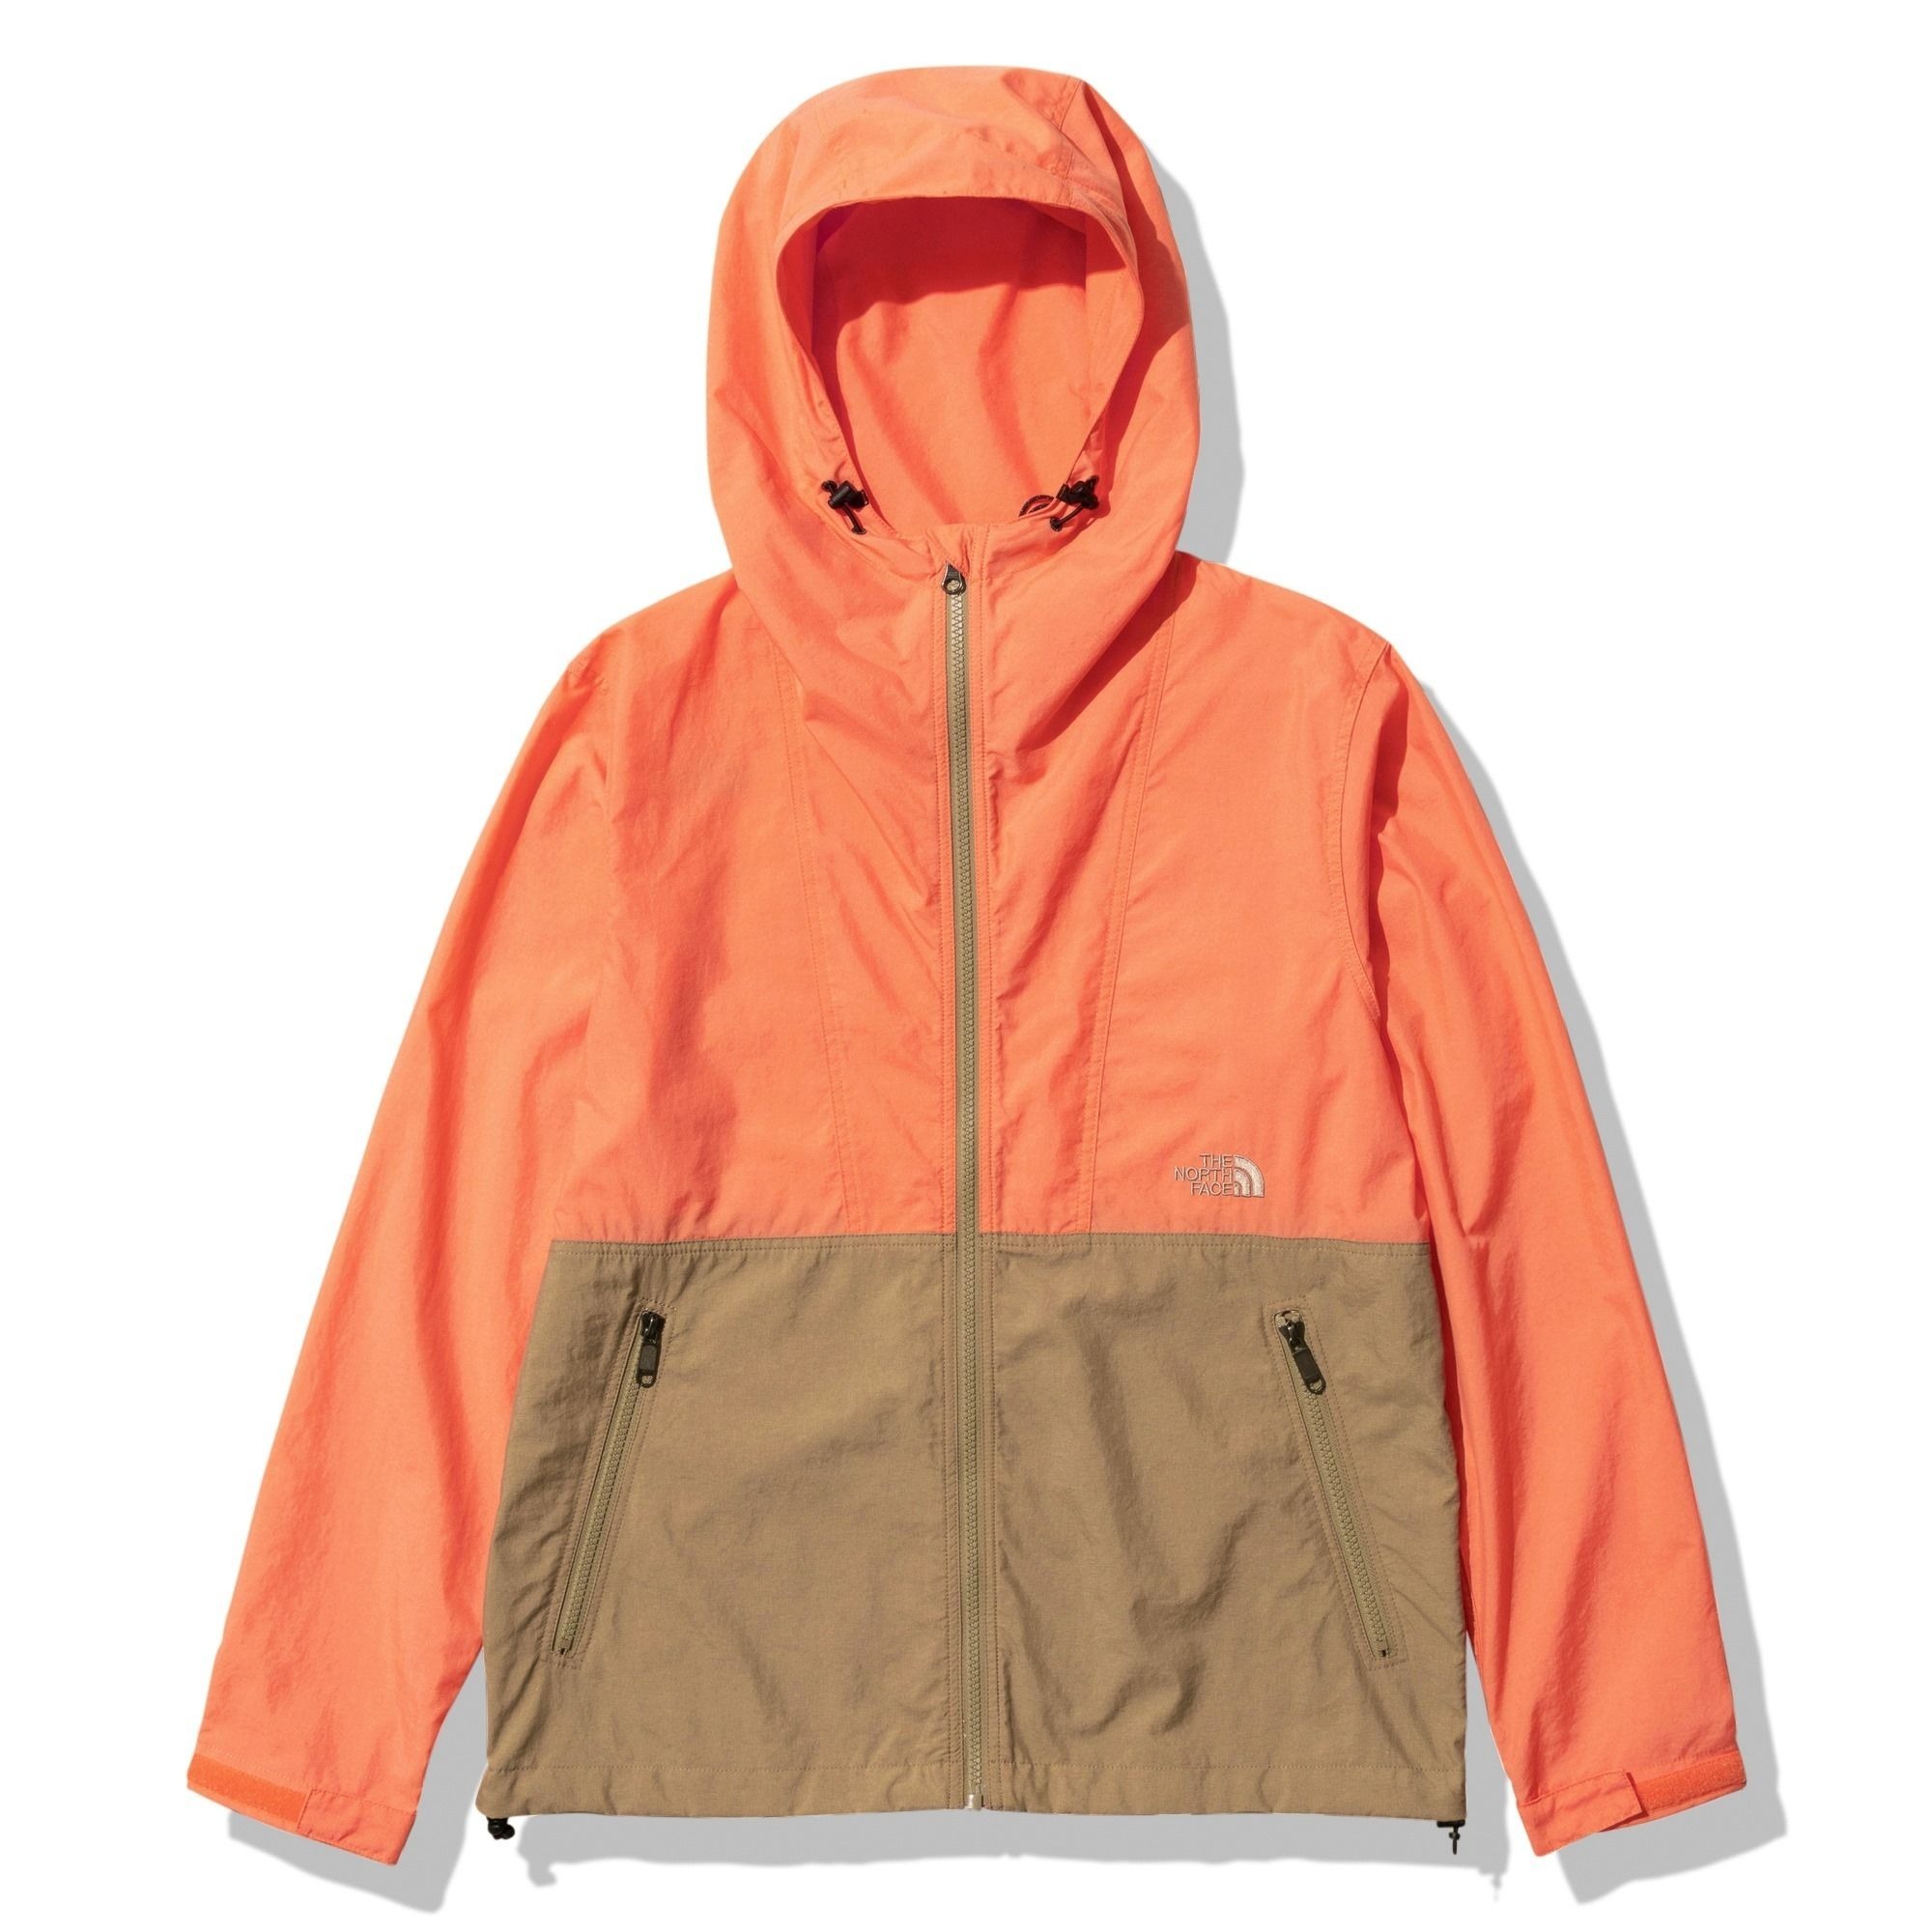 NPW72230 日本THE NORTH FACE COMPACT JACKET 連帽外套